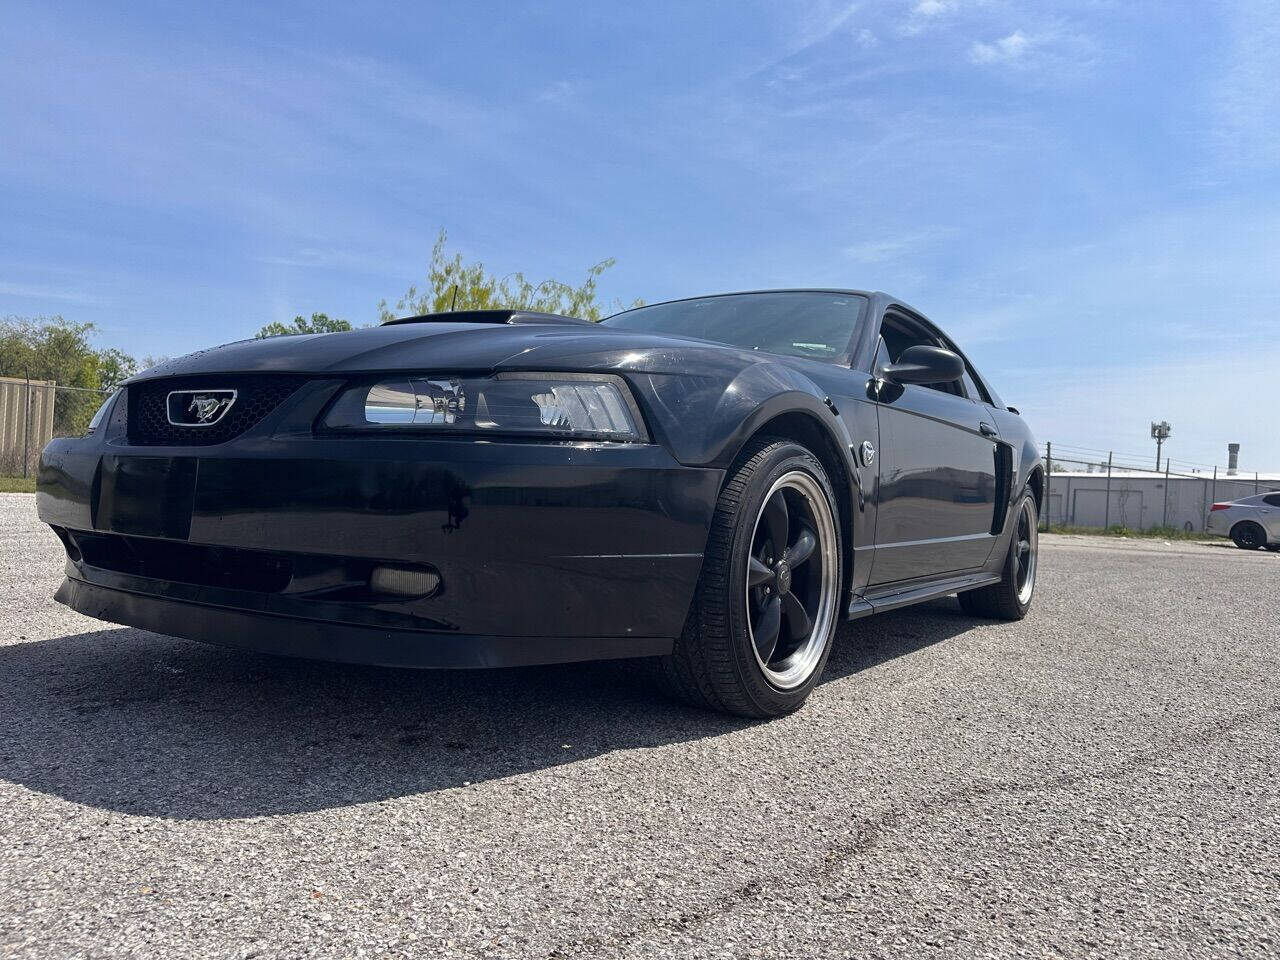 2004 Ford Mustang For Sale - Carsforsale.com®